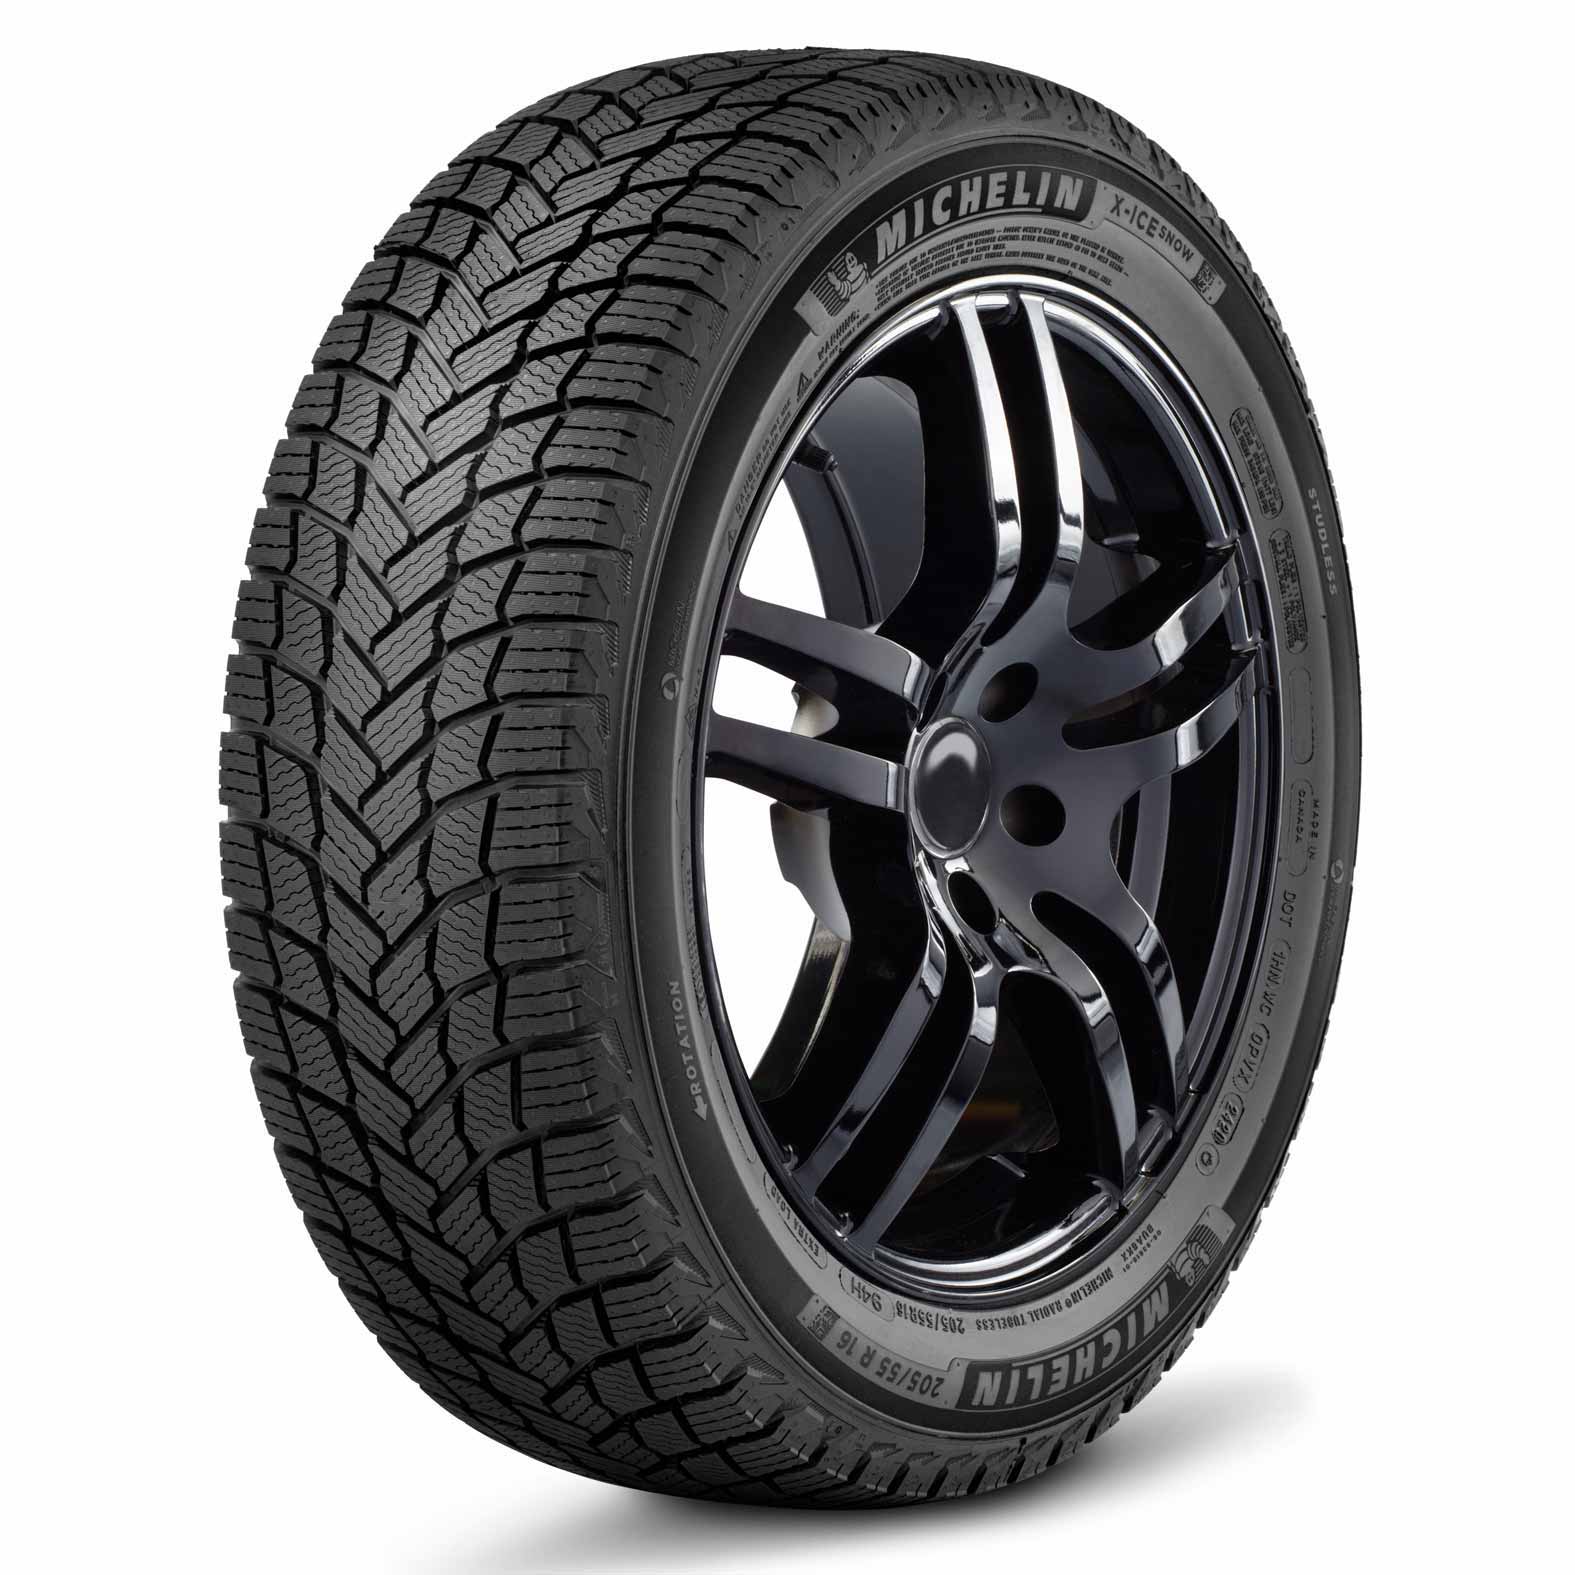 Michelin X-Ice Snow | Winter for Tire Tire Kal